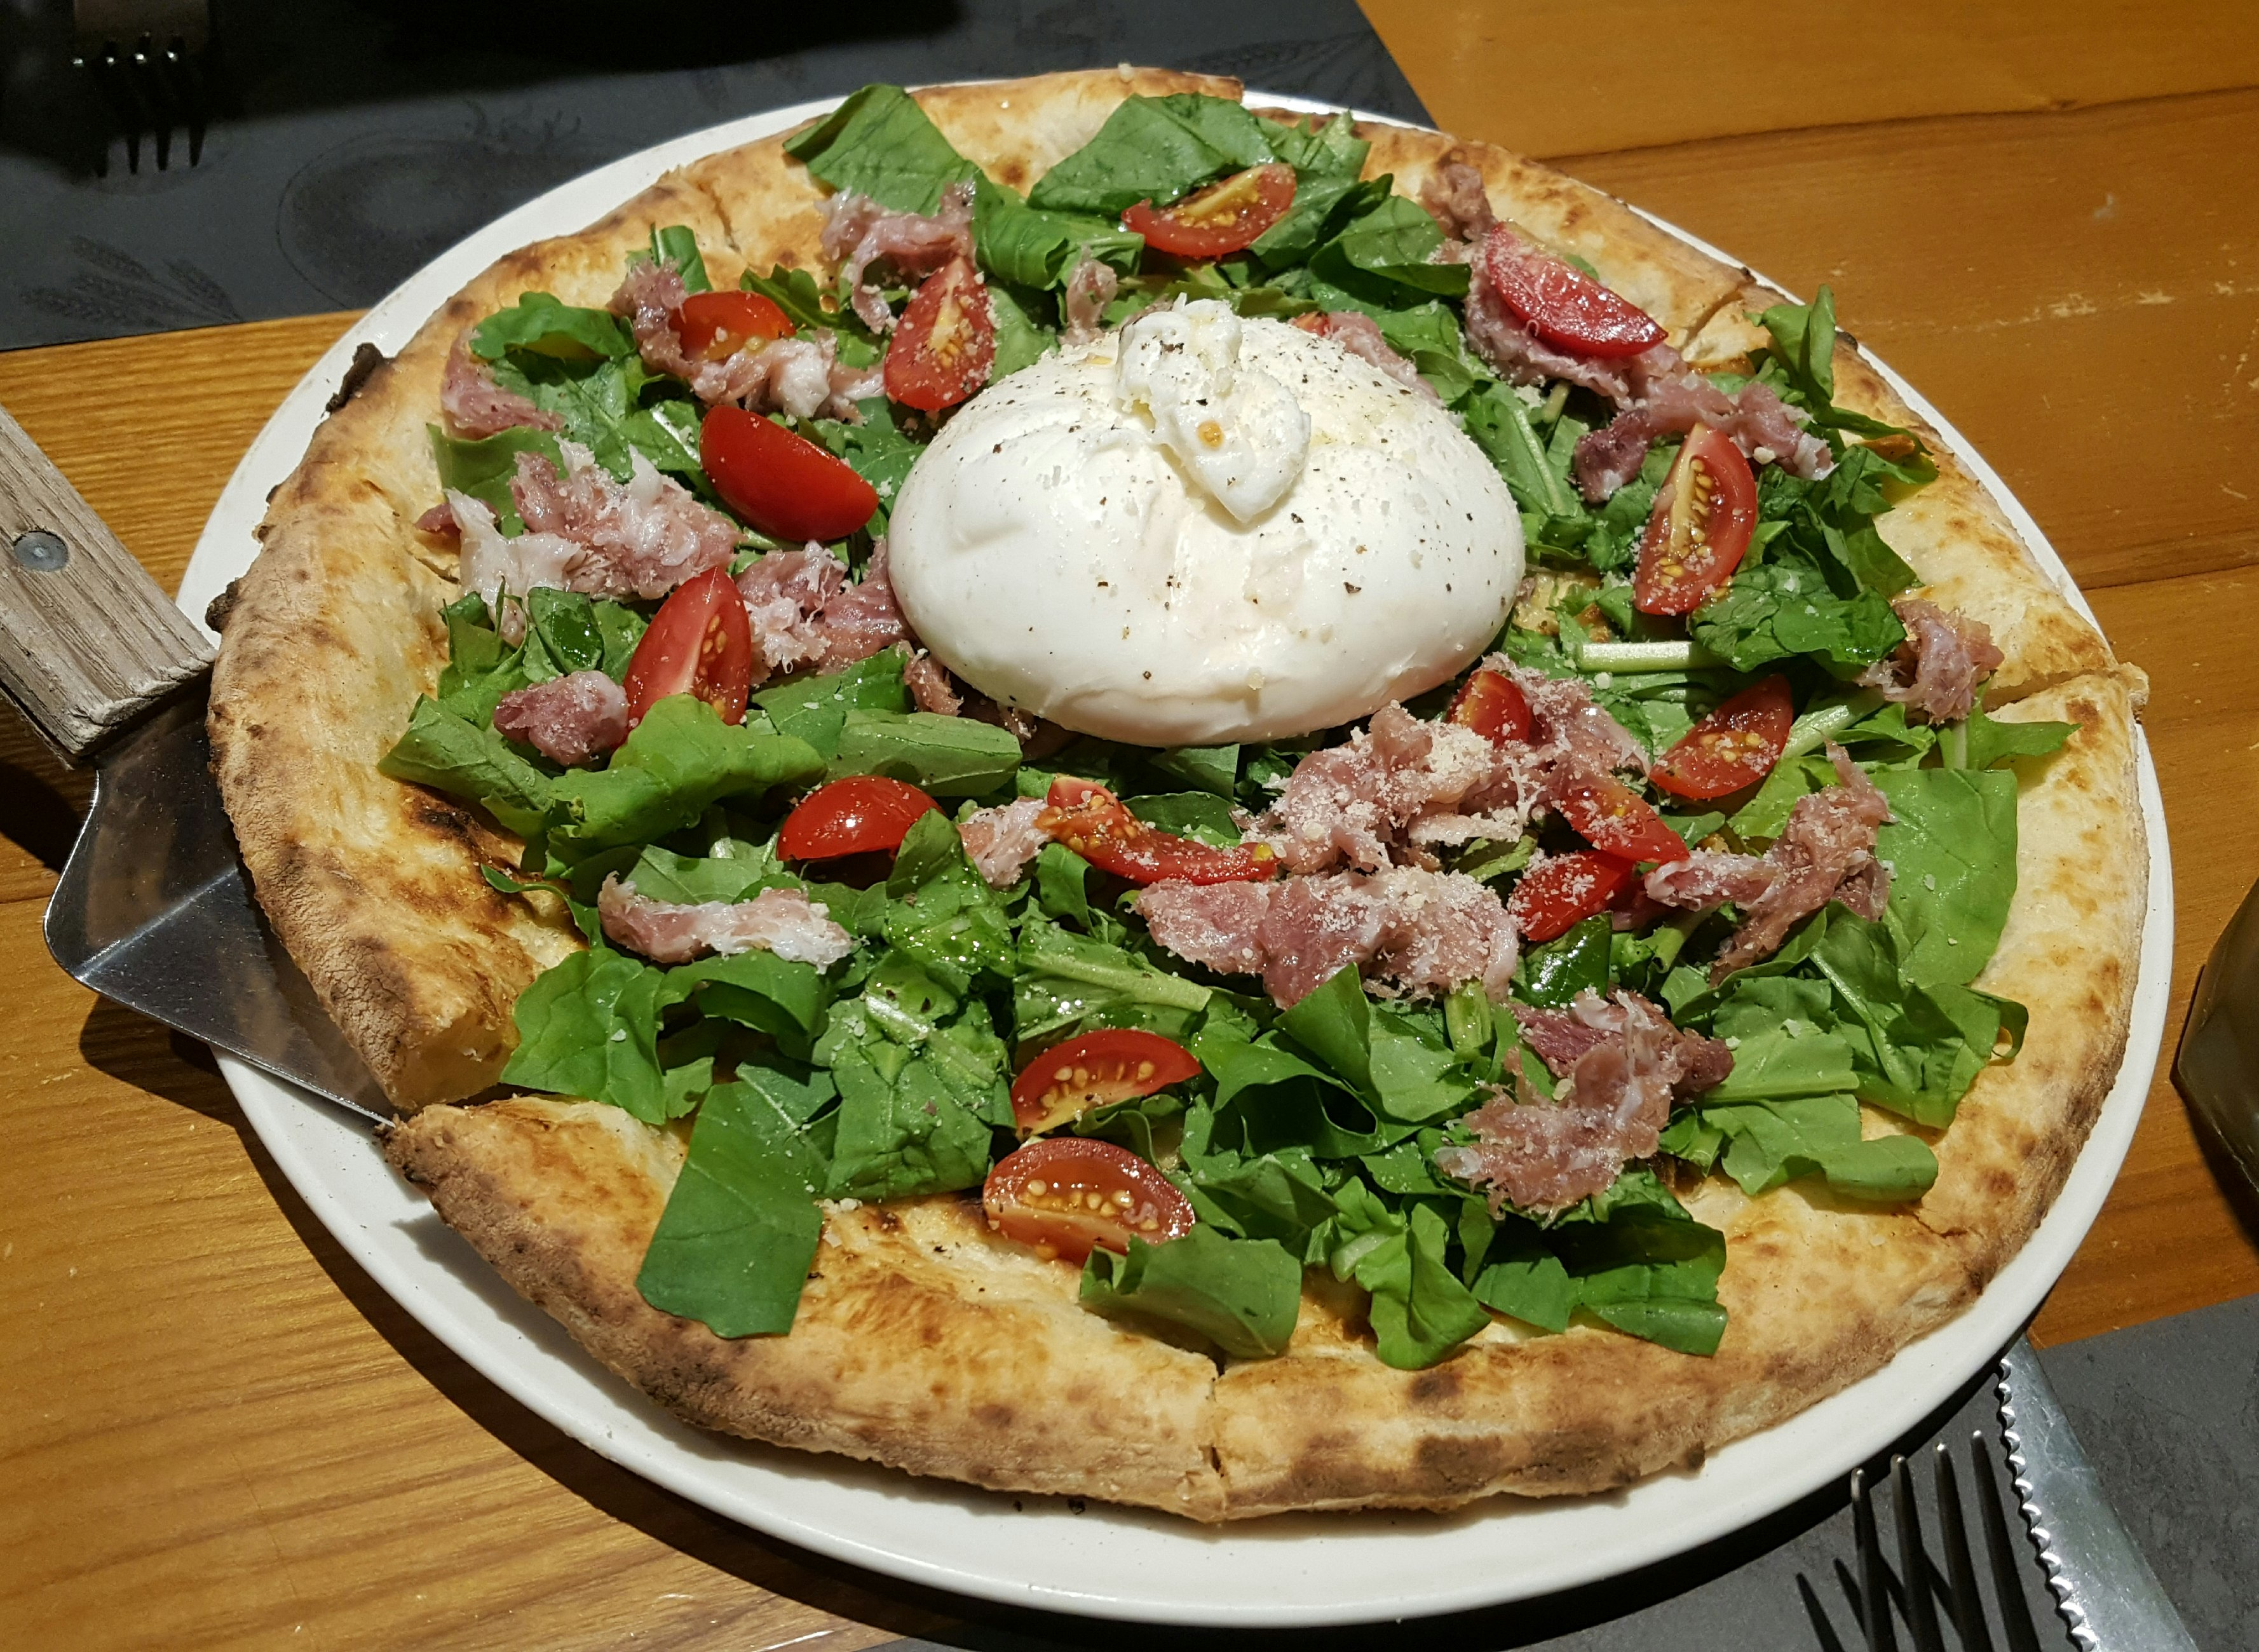 Pizza topped with greens, tomatoes, meat and a poached egg 